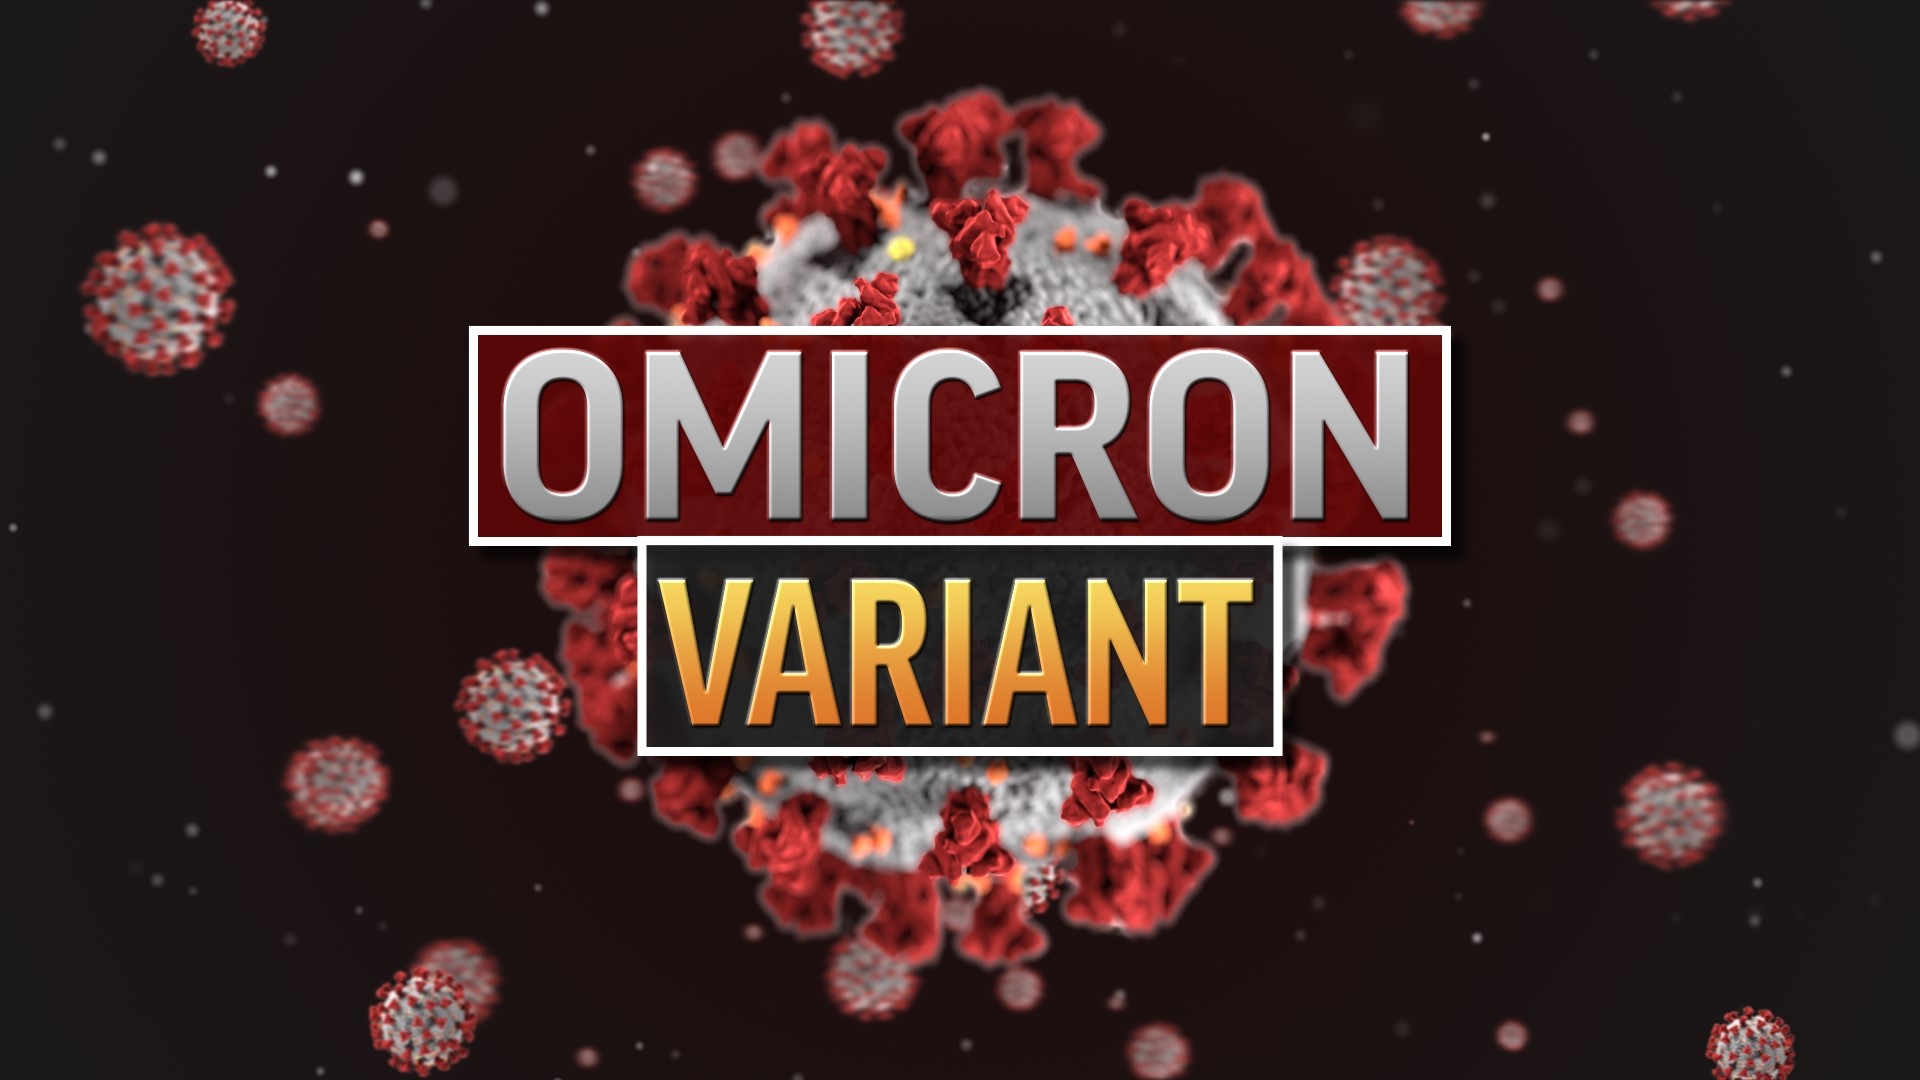 Scientists have known about omicron for less than a week at this point- so there are still a lot of unanswered questions. But let's clear up what we can.